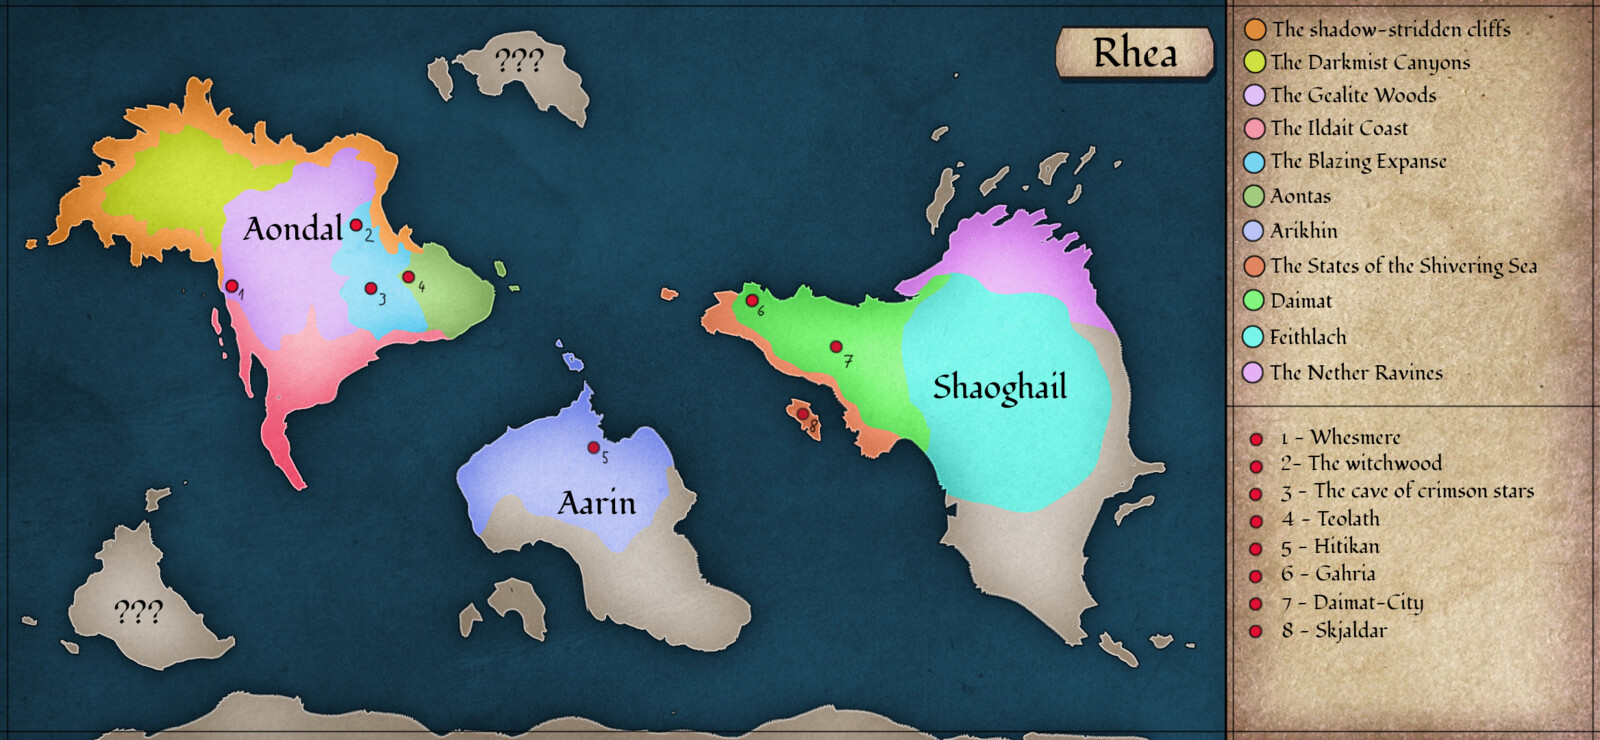 Labeled map of the fictional world of Rhea.